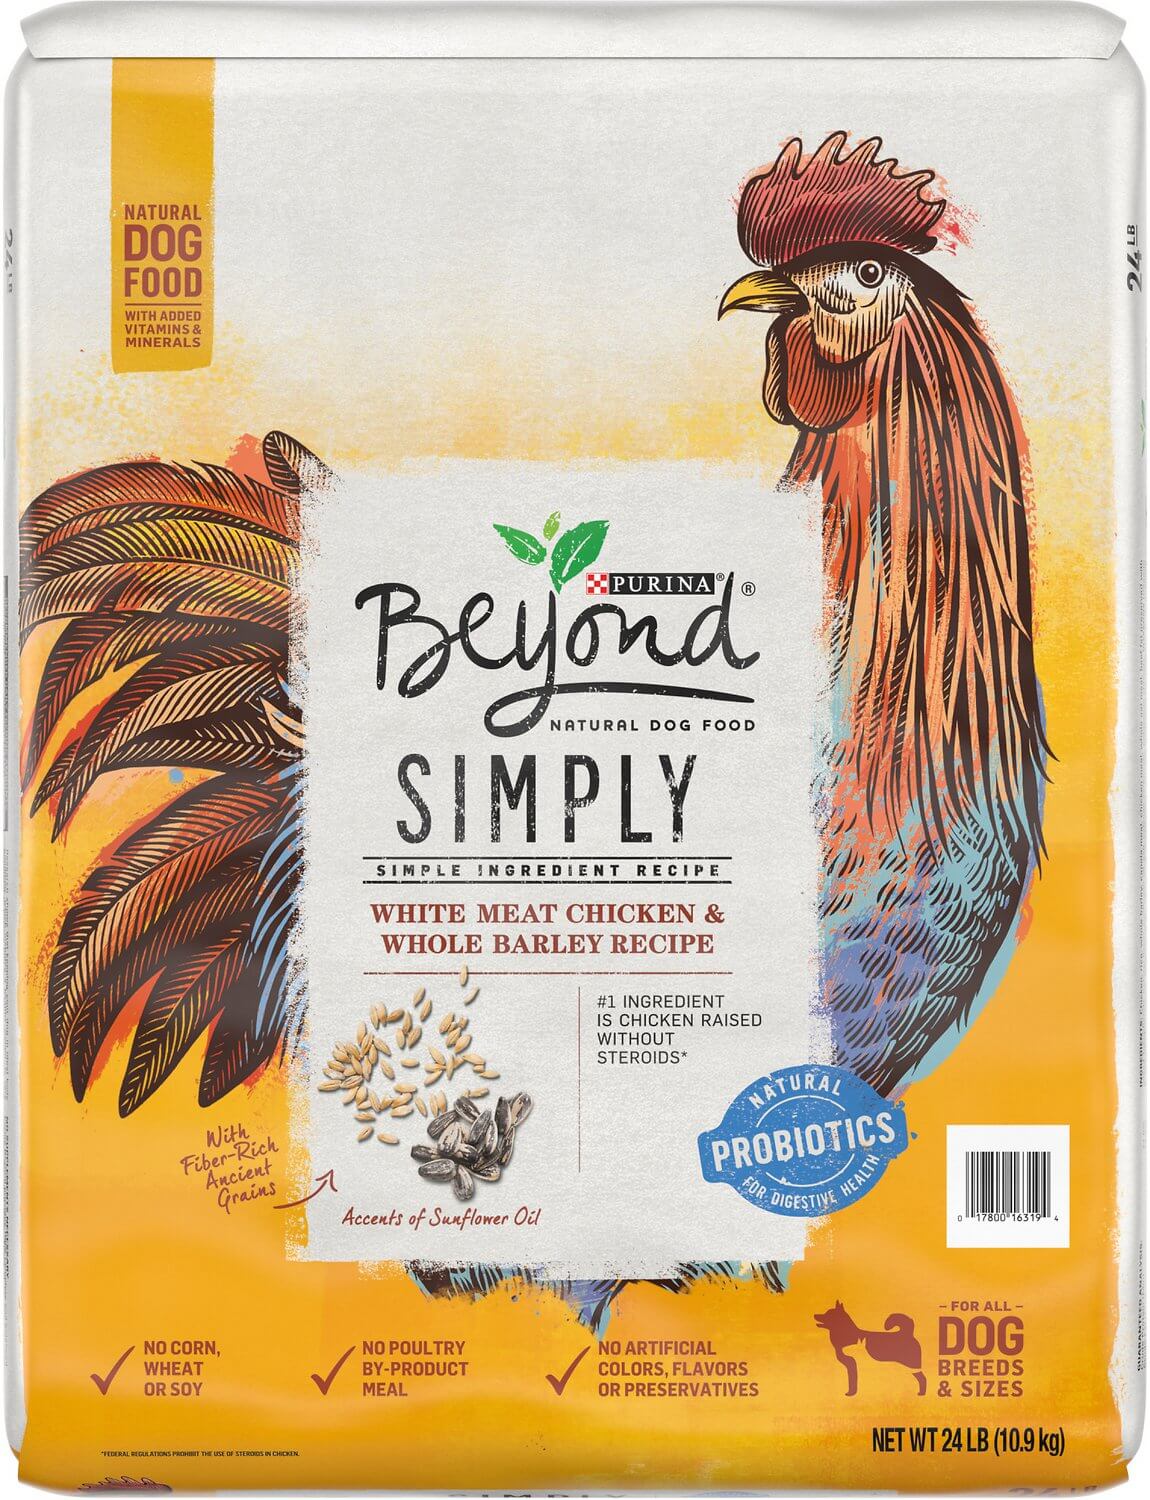 Purina Beyond Simply Dog Food Review 